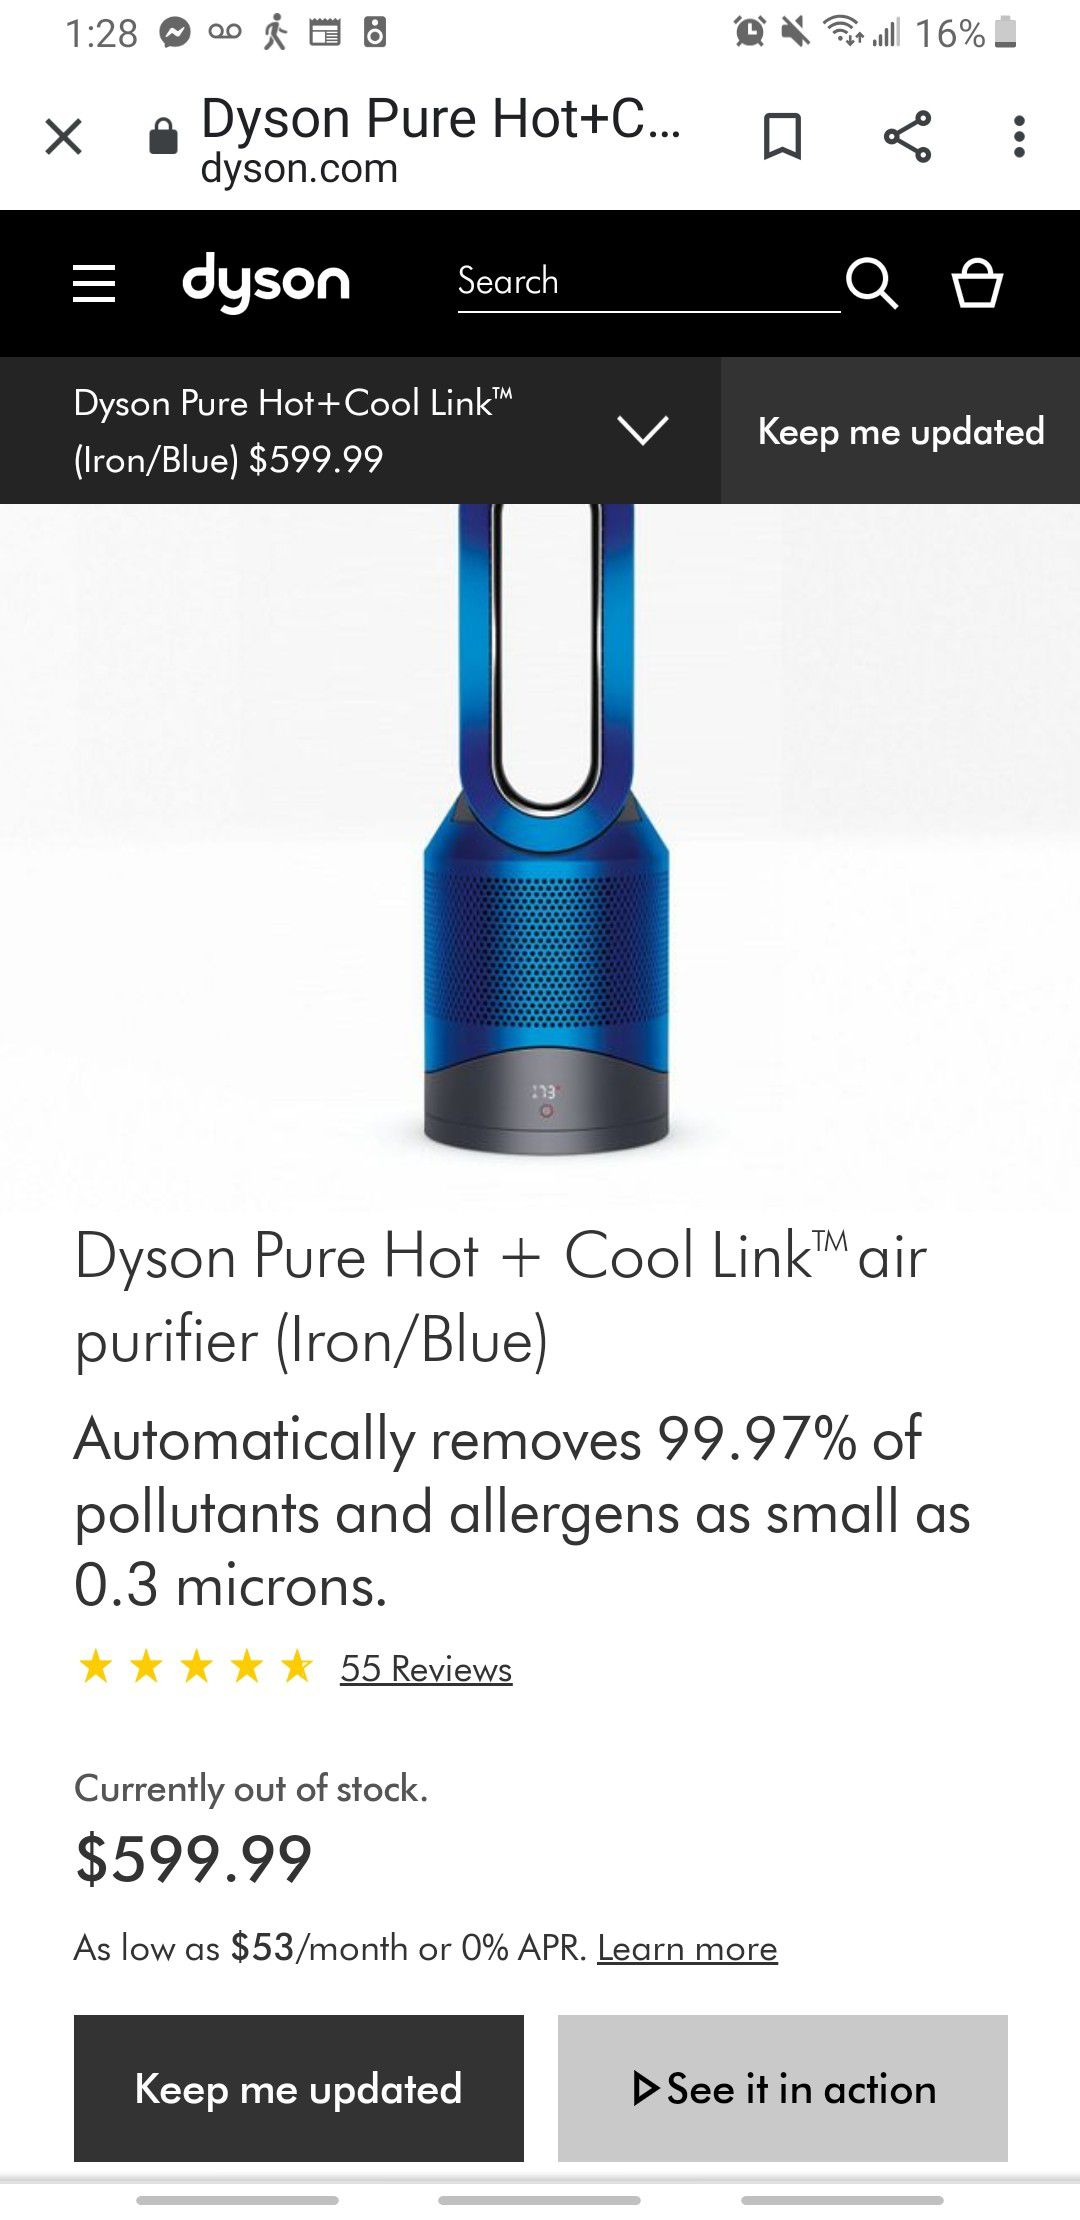 Never opened dyson pure hot and cool link air conditioner and purifyer